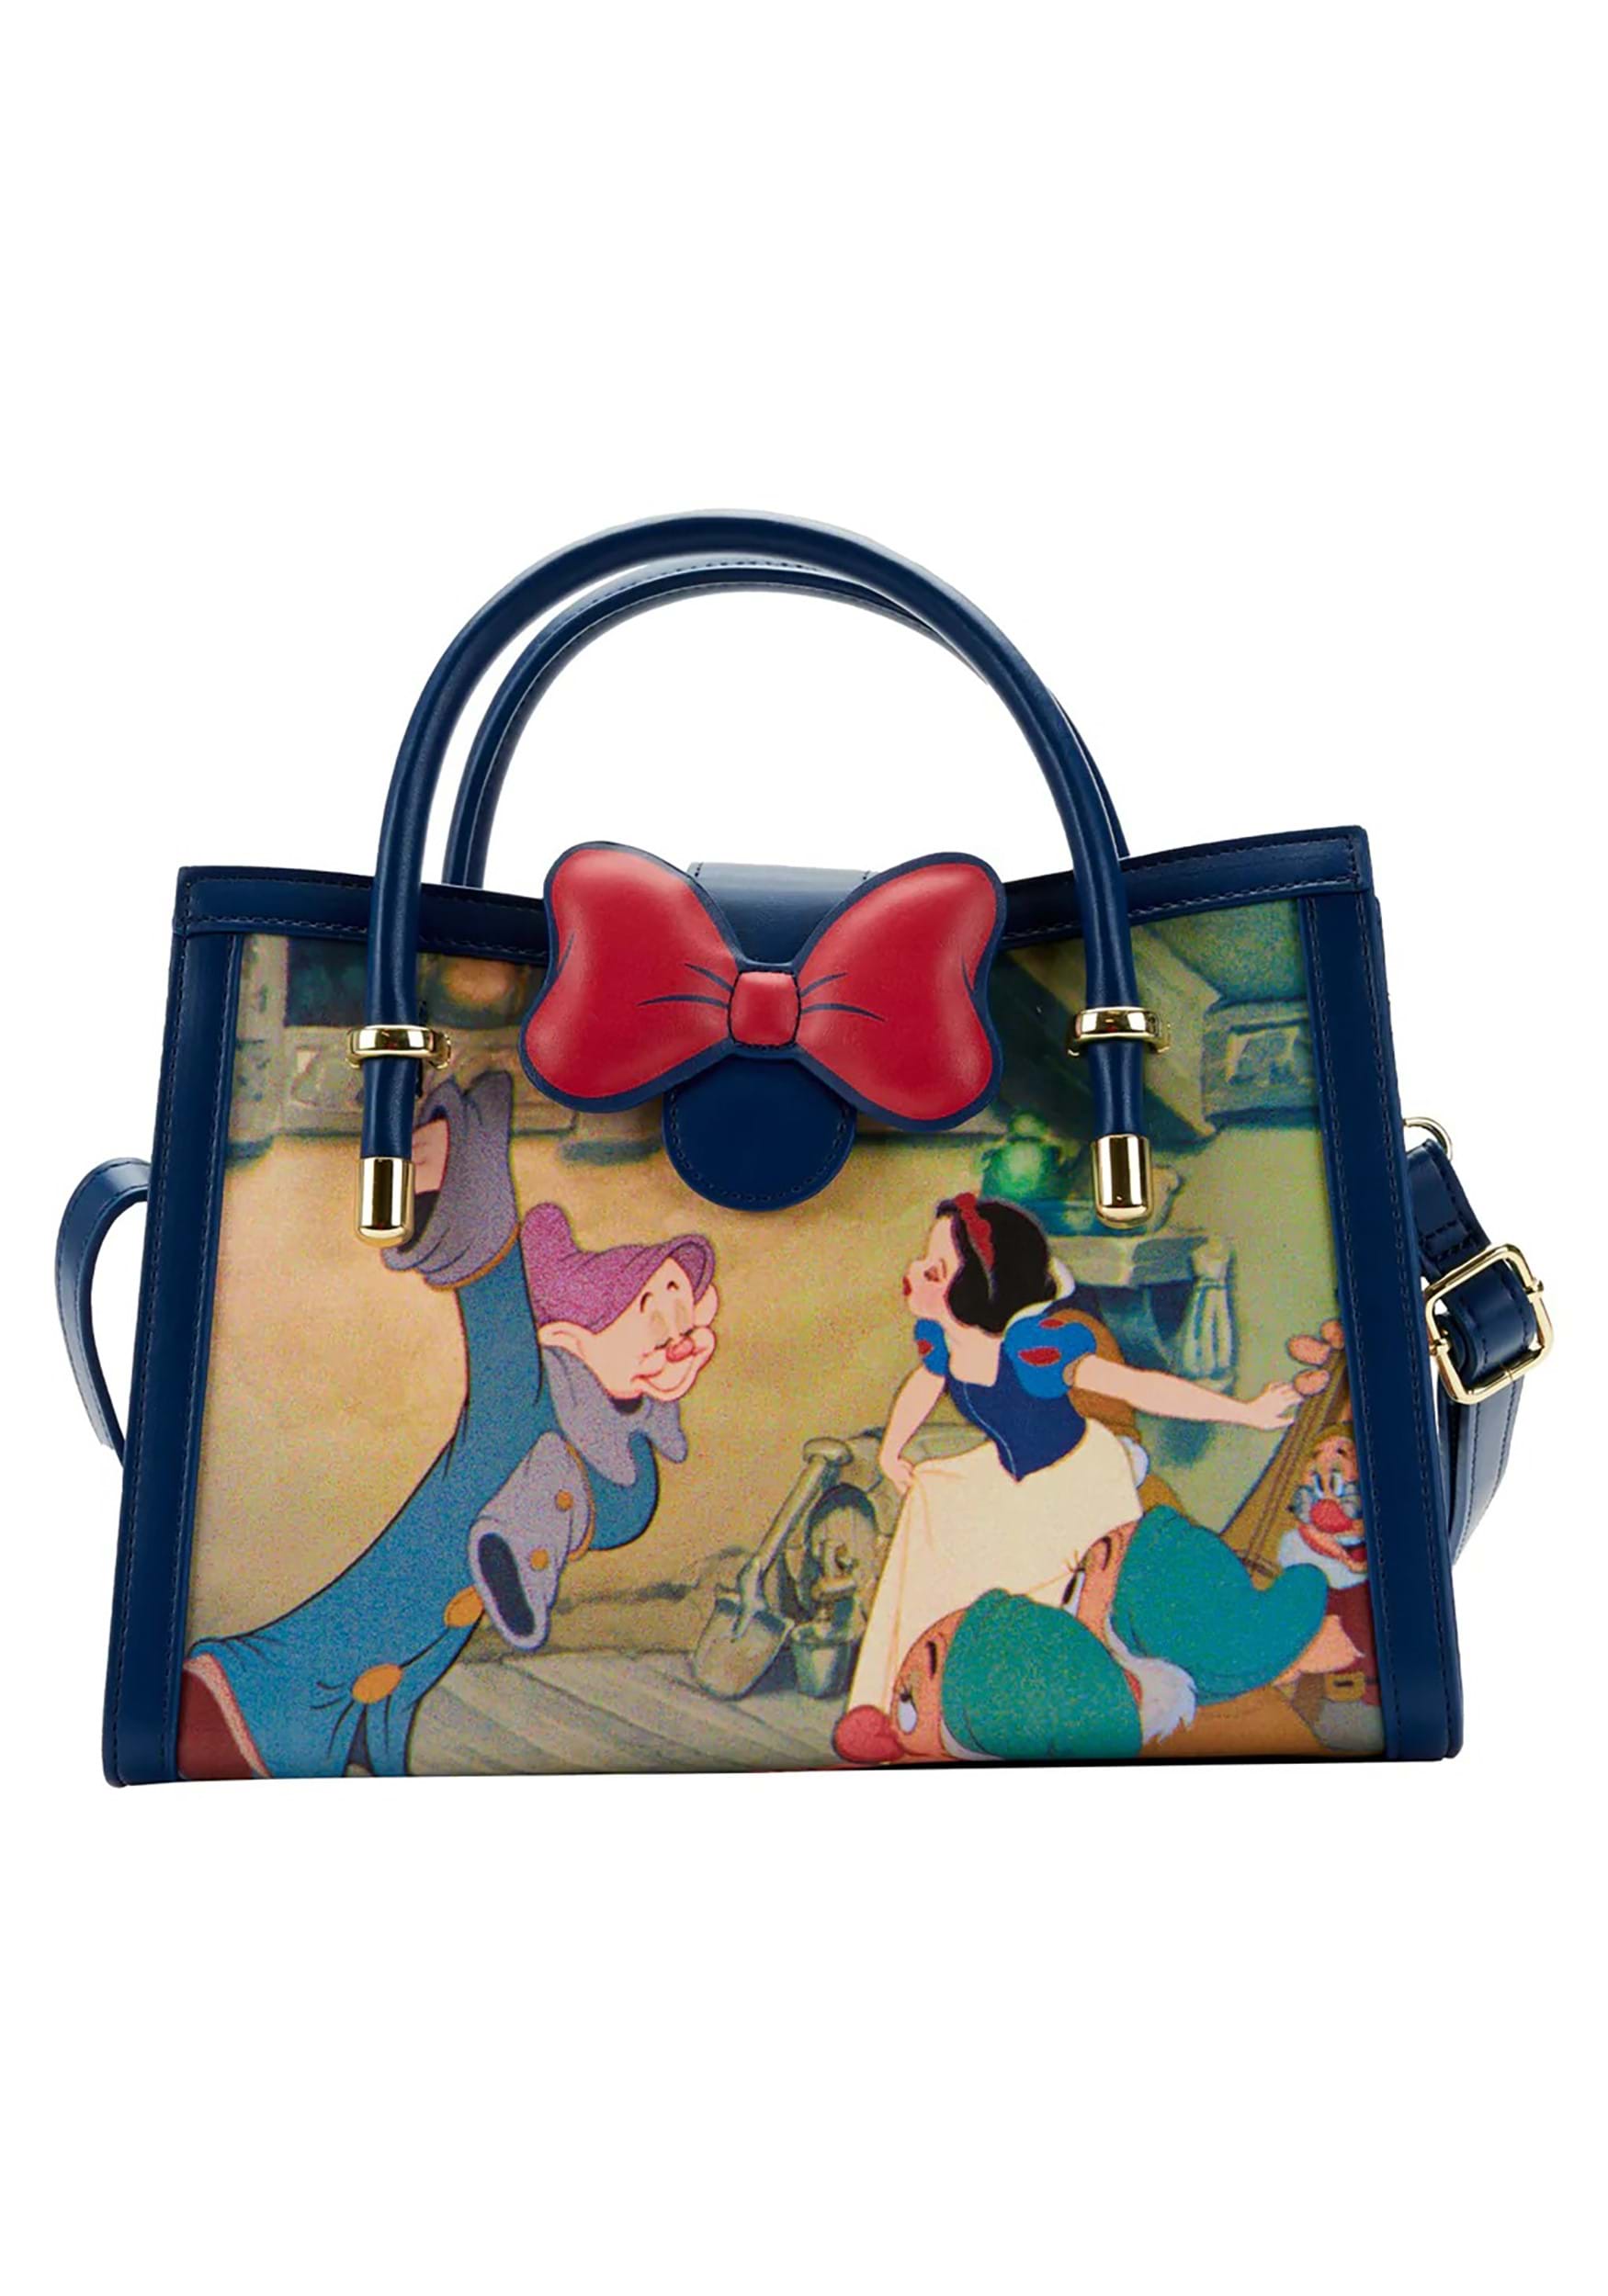 snow white purse products for sale | eBay